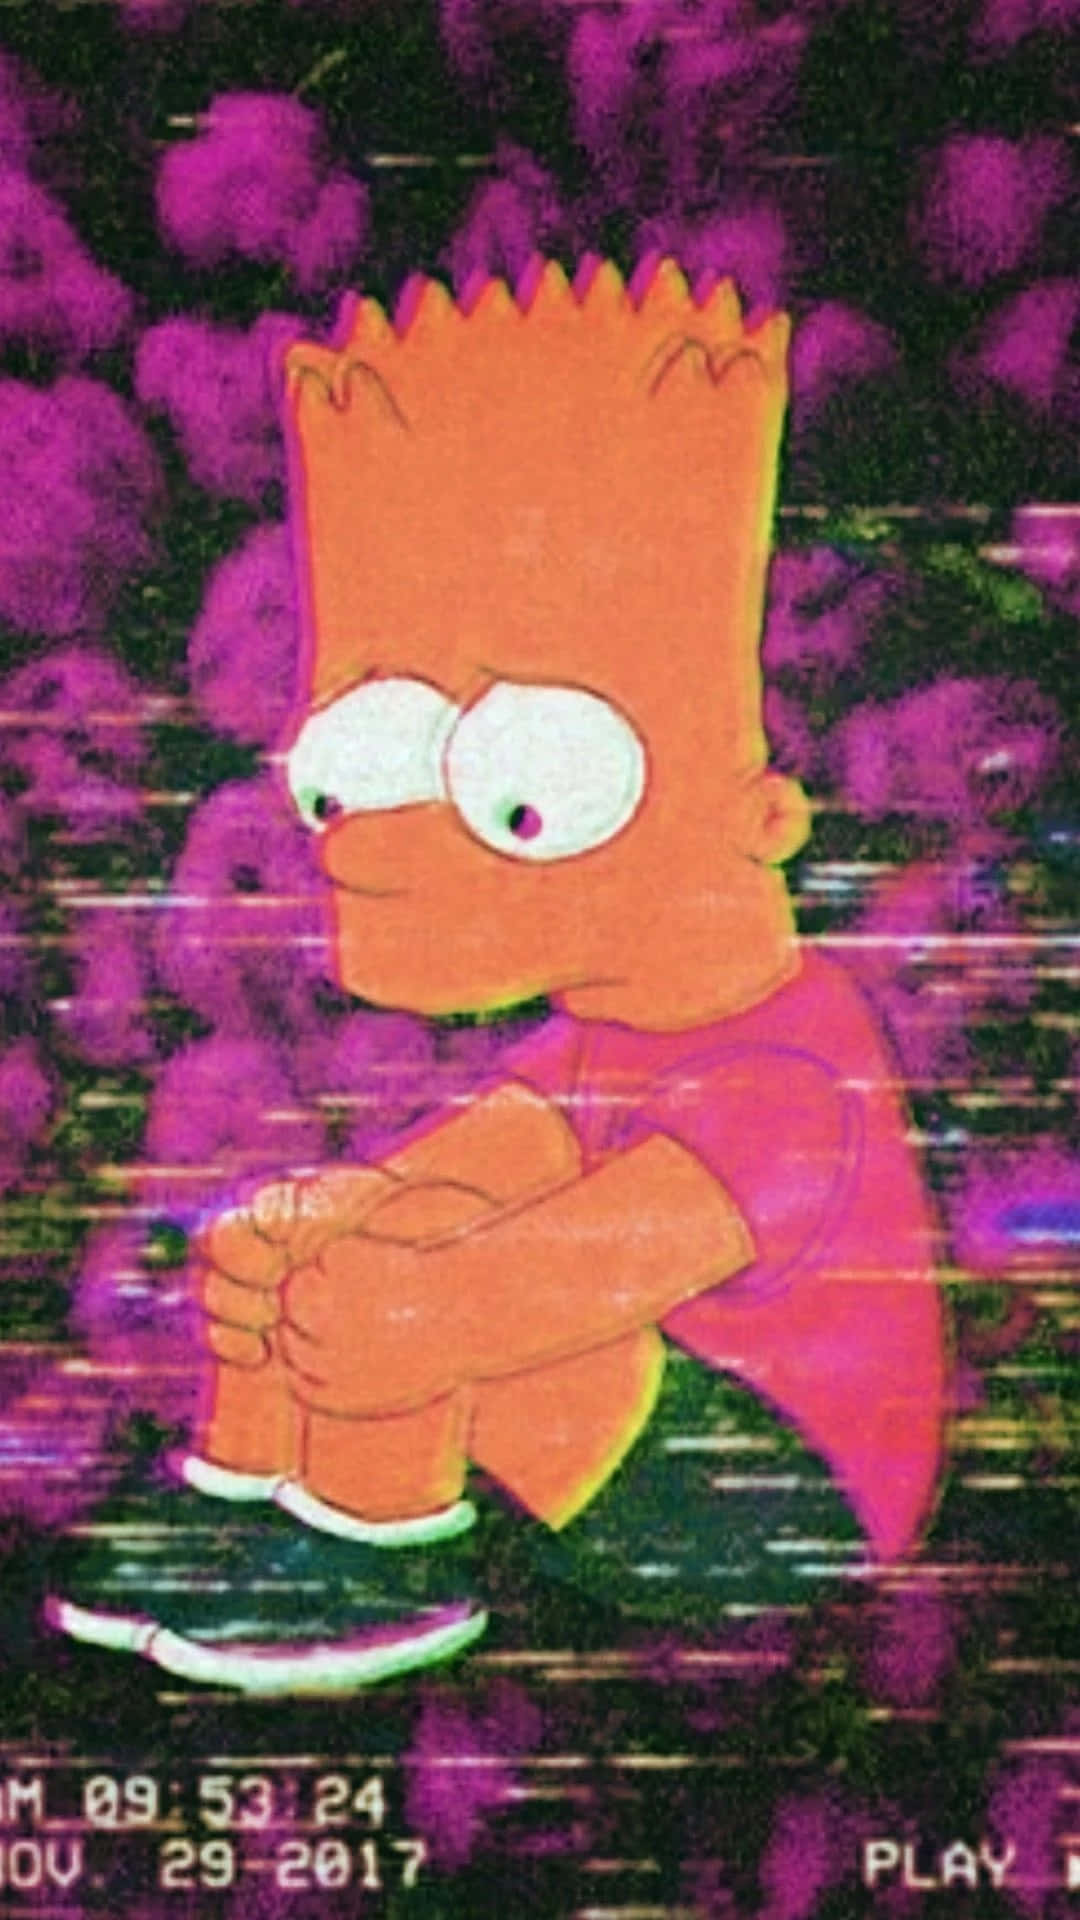 Download Bart Simpson Feels Lost and Depressed Wallpaper